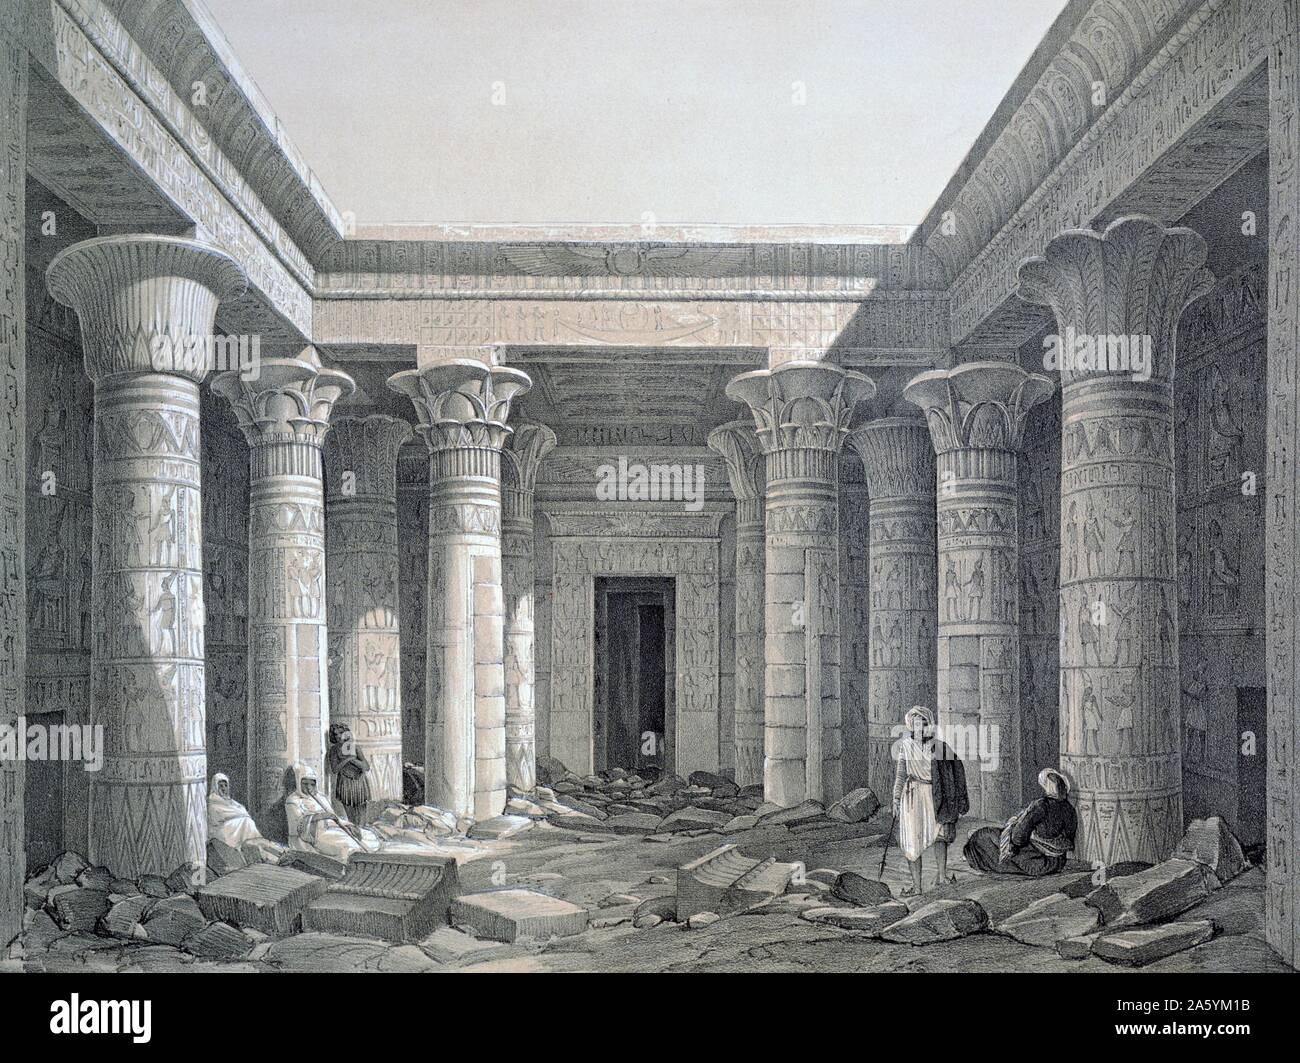 Court of the Great Temple - Philae', 1843.  Lithograph after Owen Jones and Jules Goury. Temple of Isis principal goddess of ancient Egypt, sister and wife of Osiris.  Archaeology Architecture Religion Mythology Ancient Egyptian Stock Photo